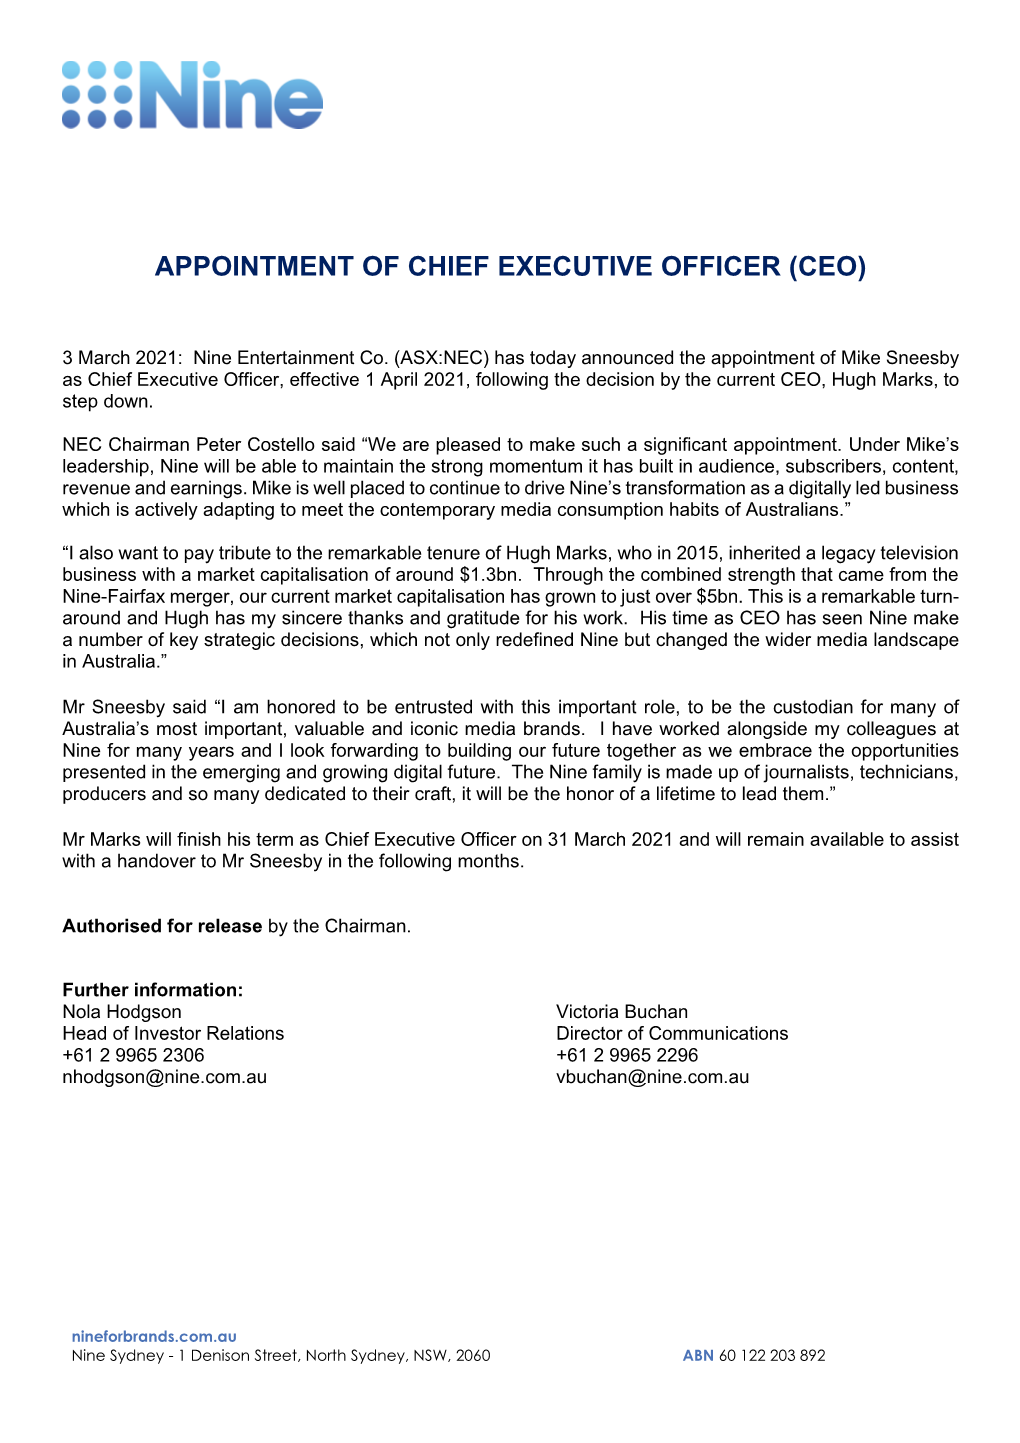 Appointment of Chief Executive Officer (Ceo)